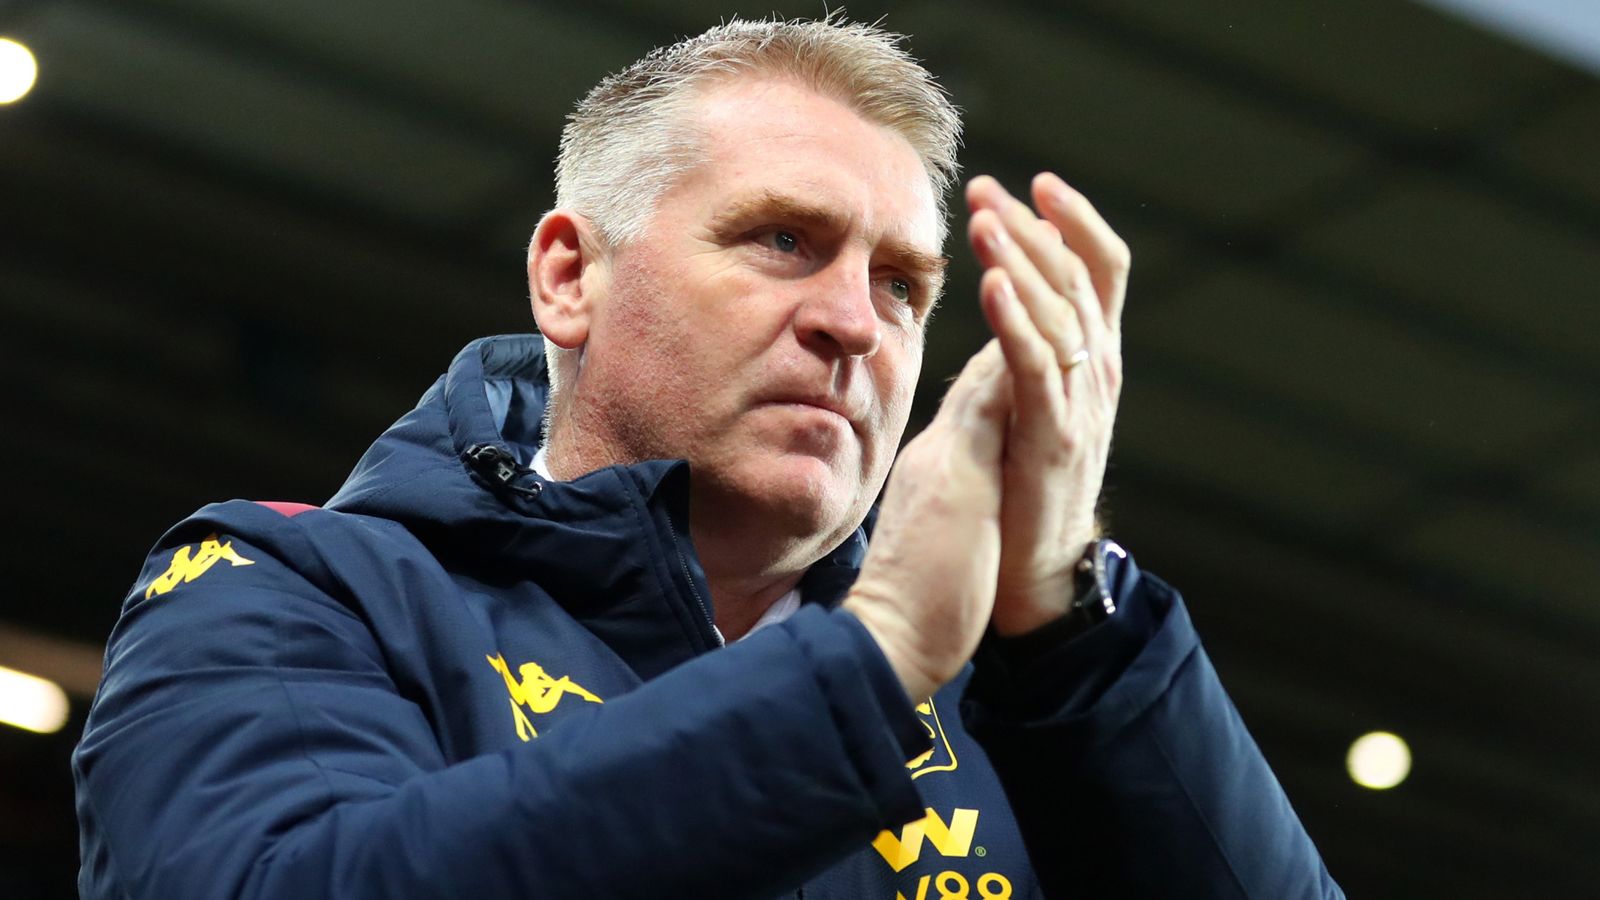 Norwich City expected to offer Dean Smith manager’s job in next few days